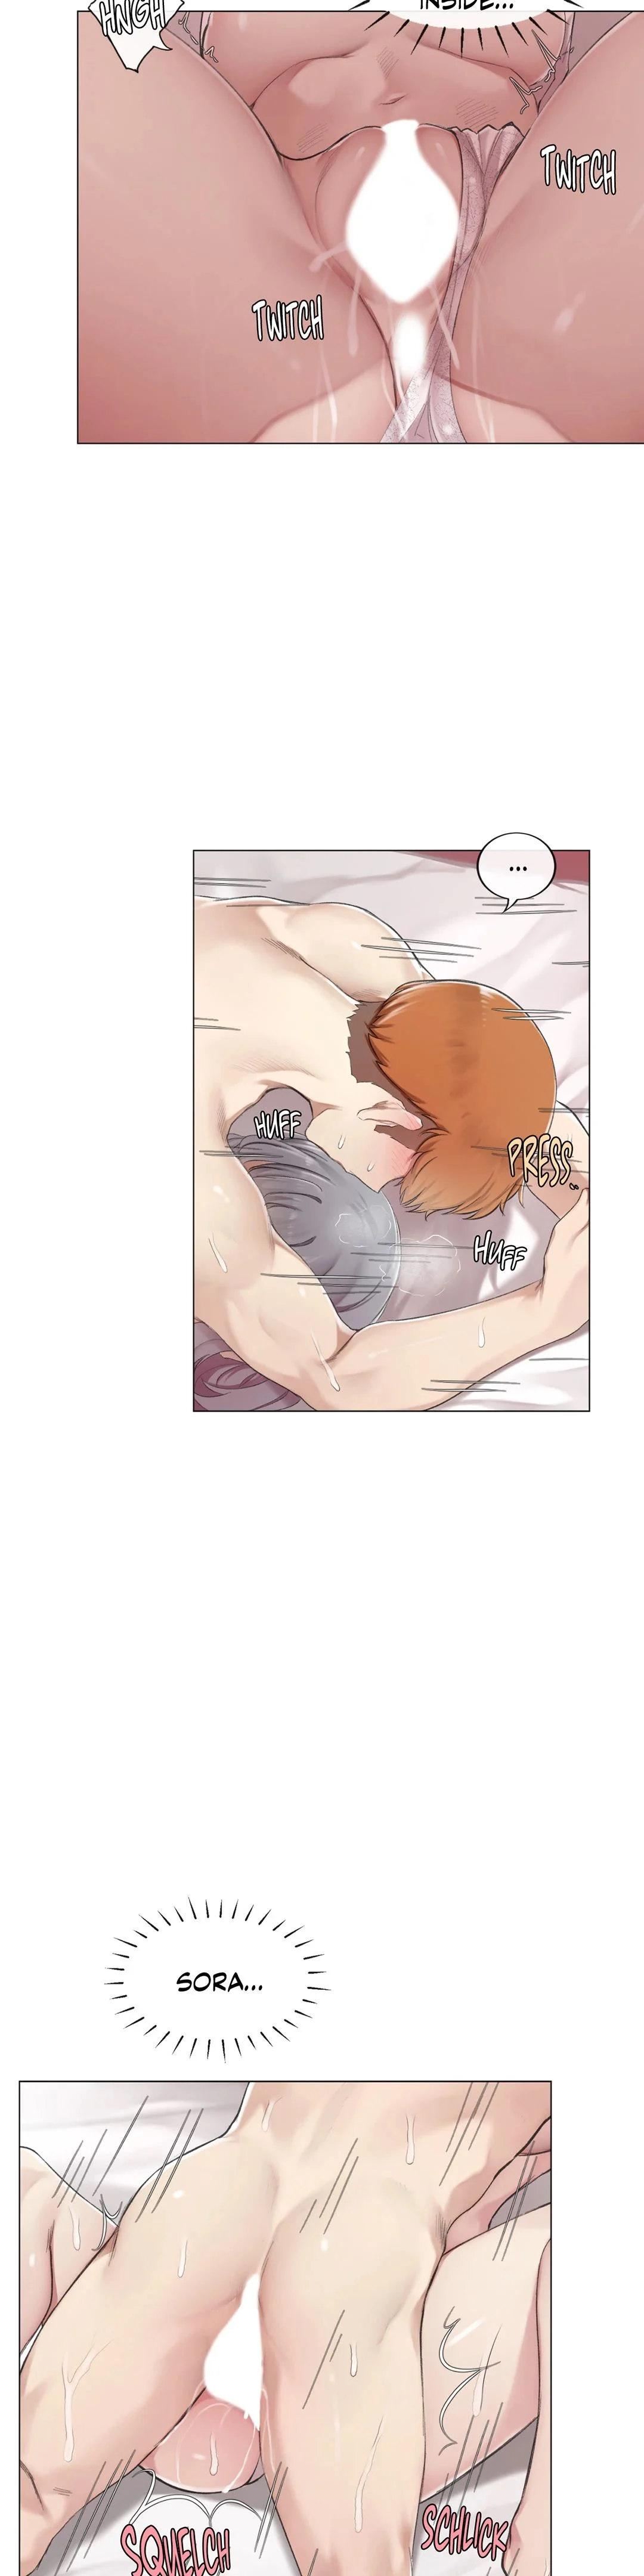 [Dumangoon, KONG_] Sexcape Room: Snap Off Ch.7/7 [English] [Manhwa PDF] Completed 110